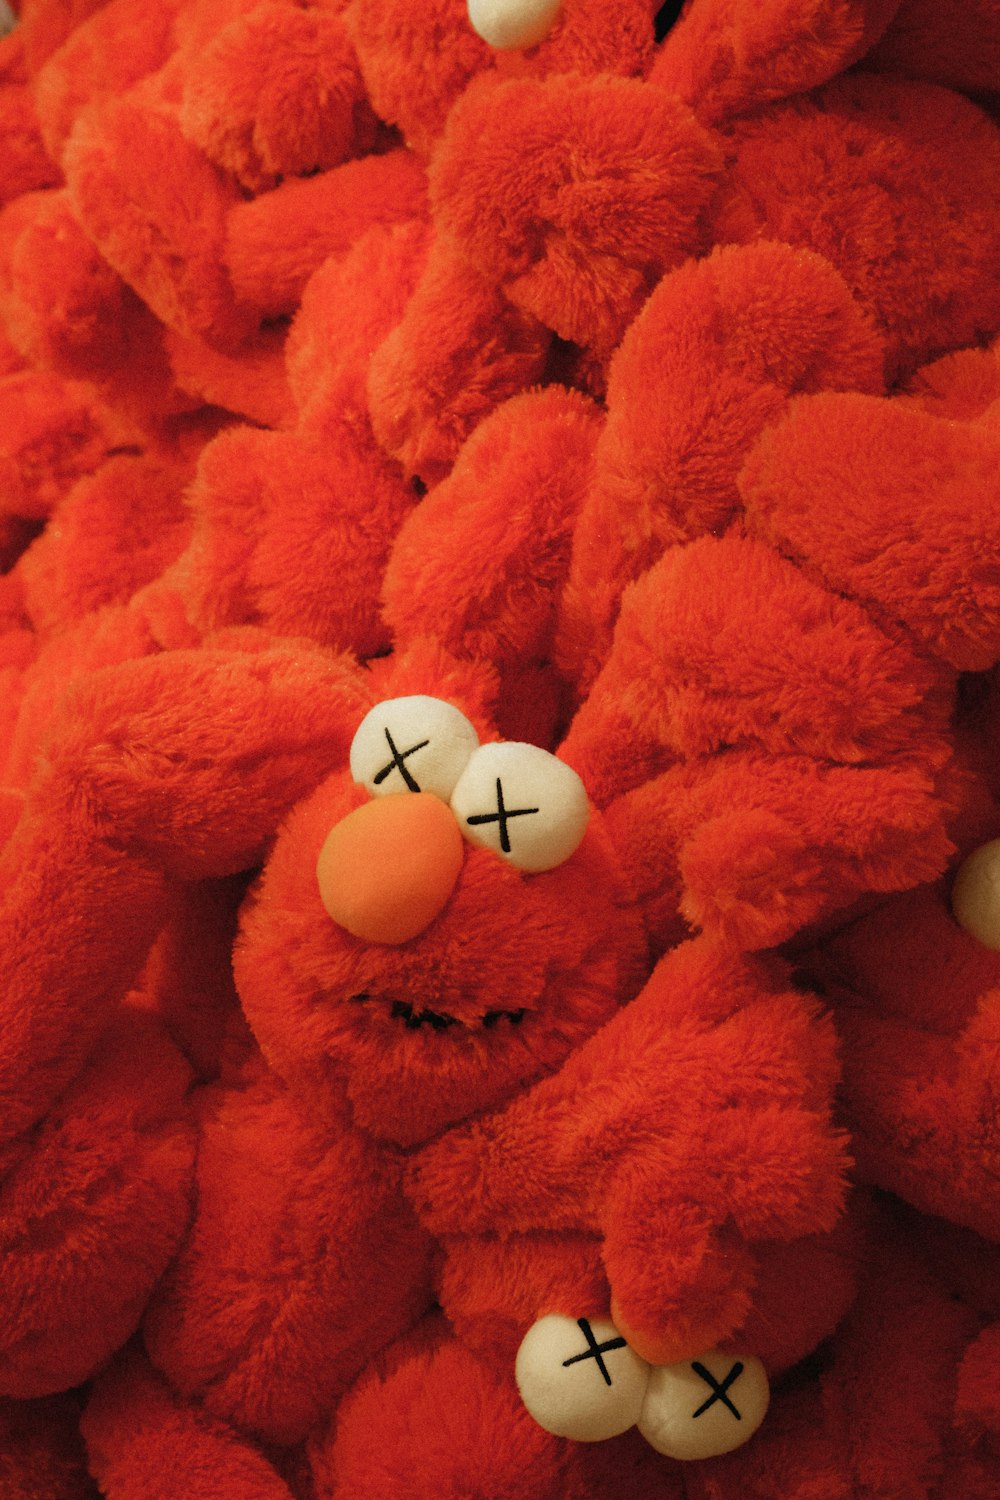 a close up of a stuffed animal with eyes